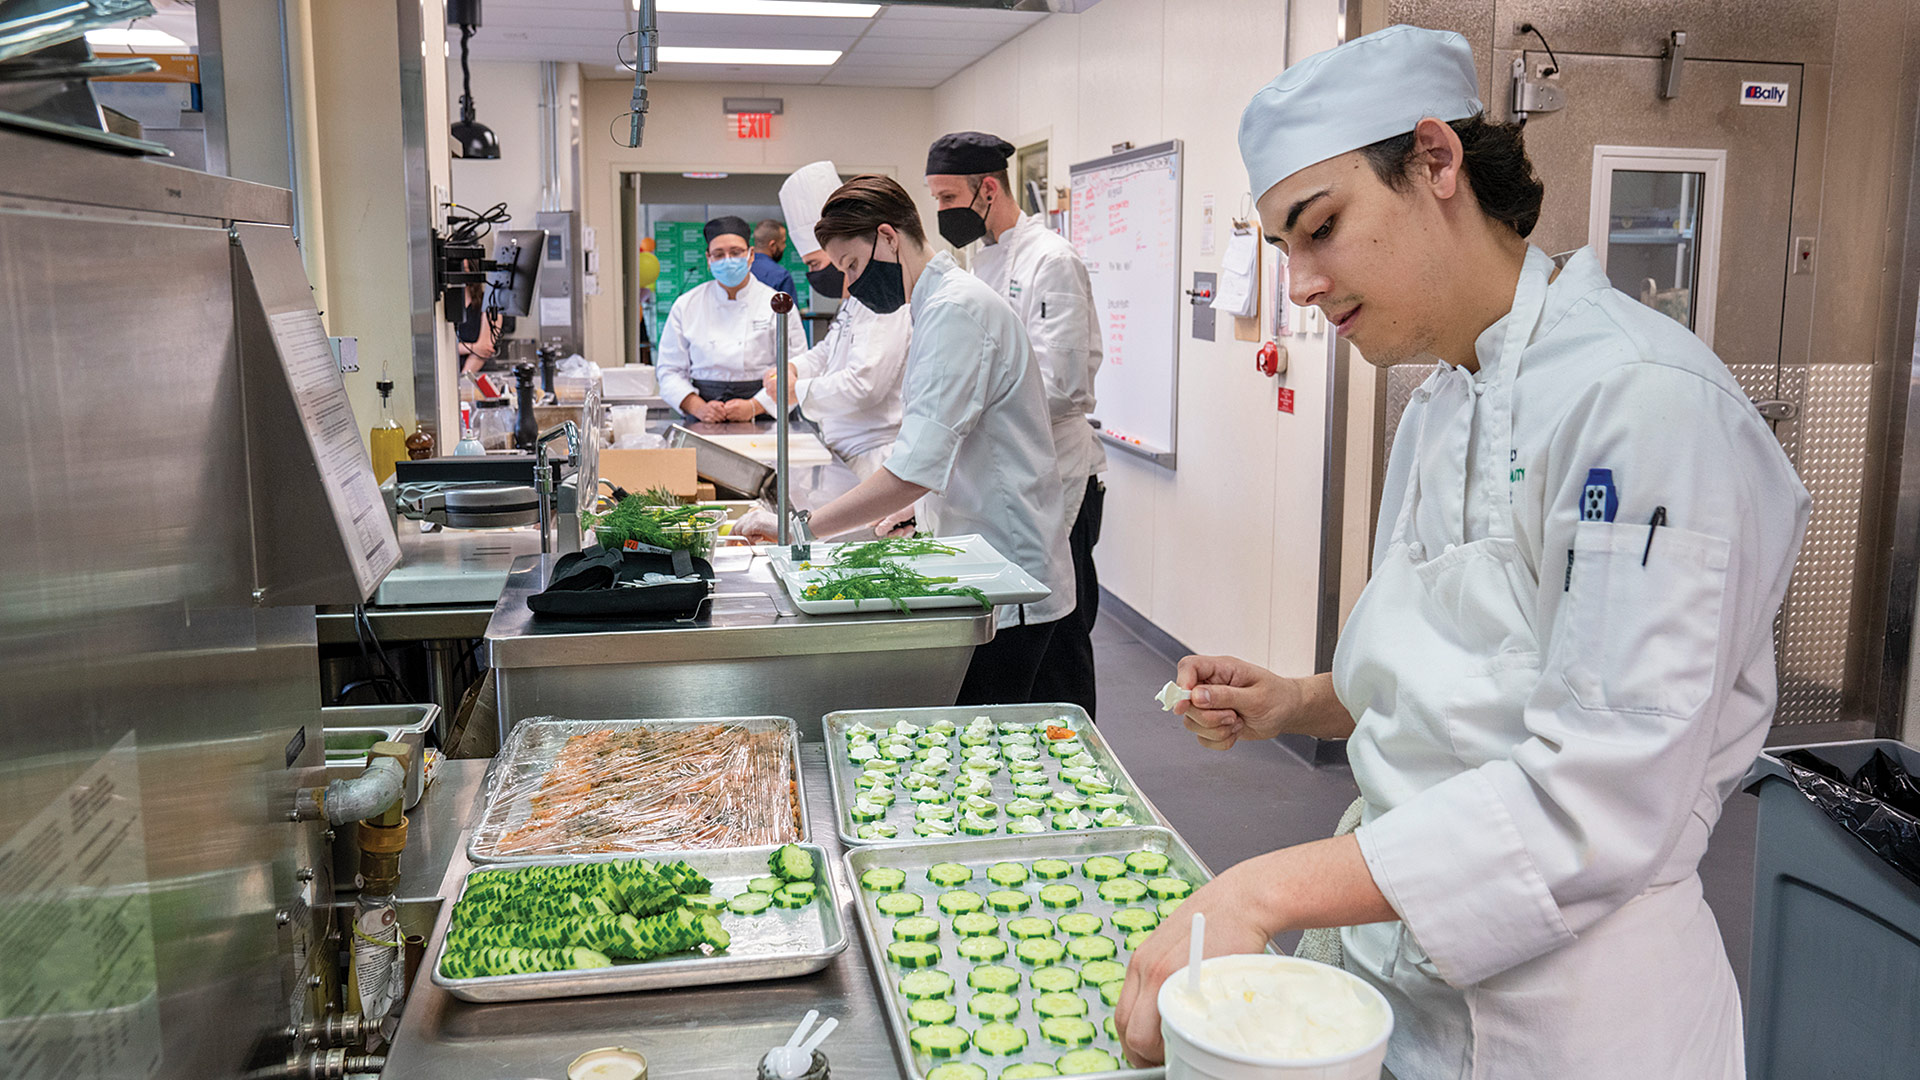 HCC Culinary Arts students prepare hors d’oeuvres